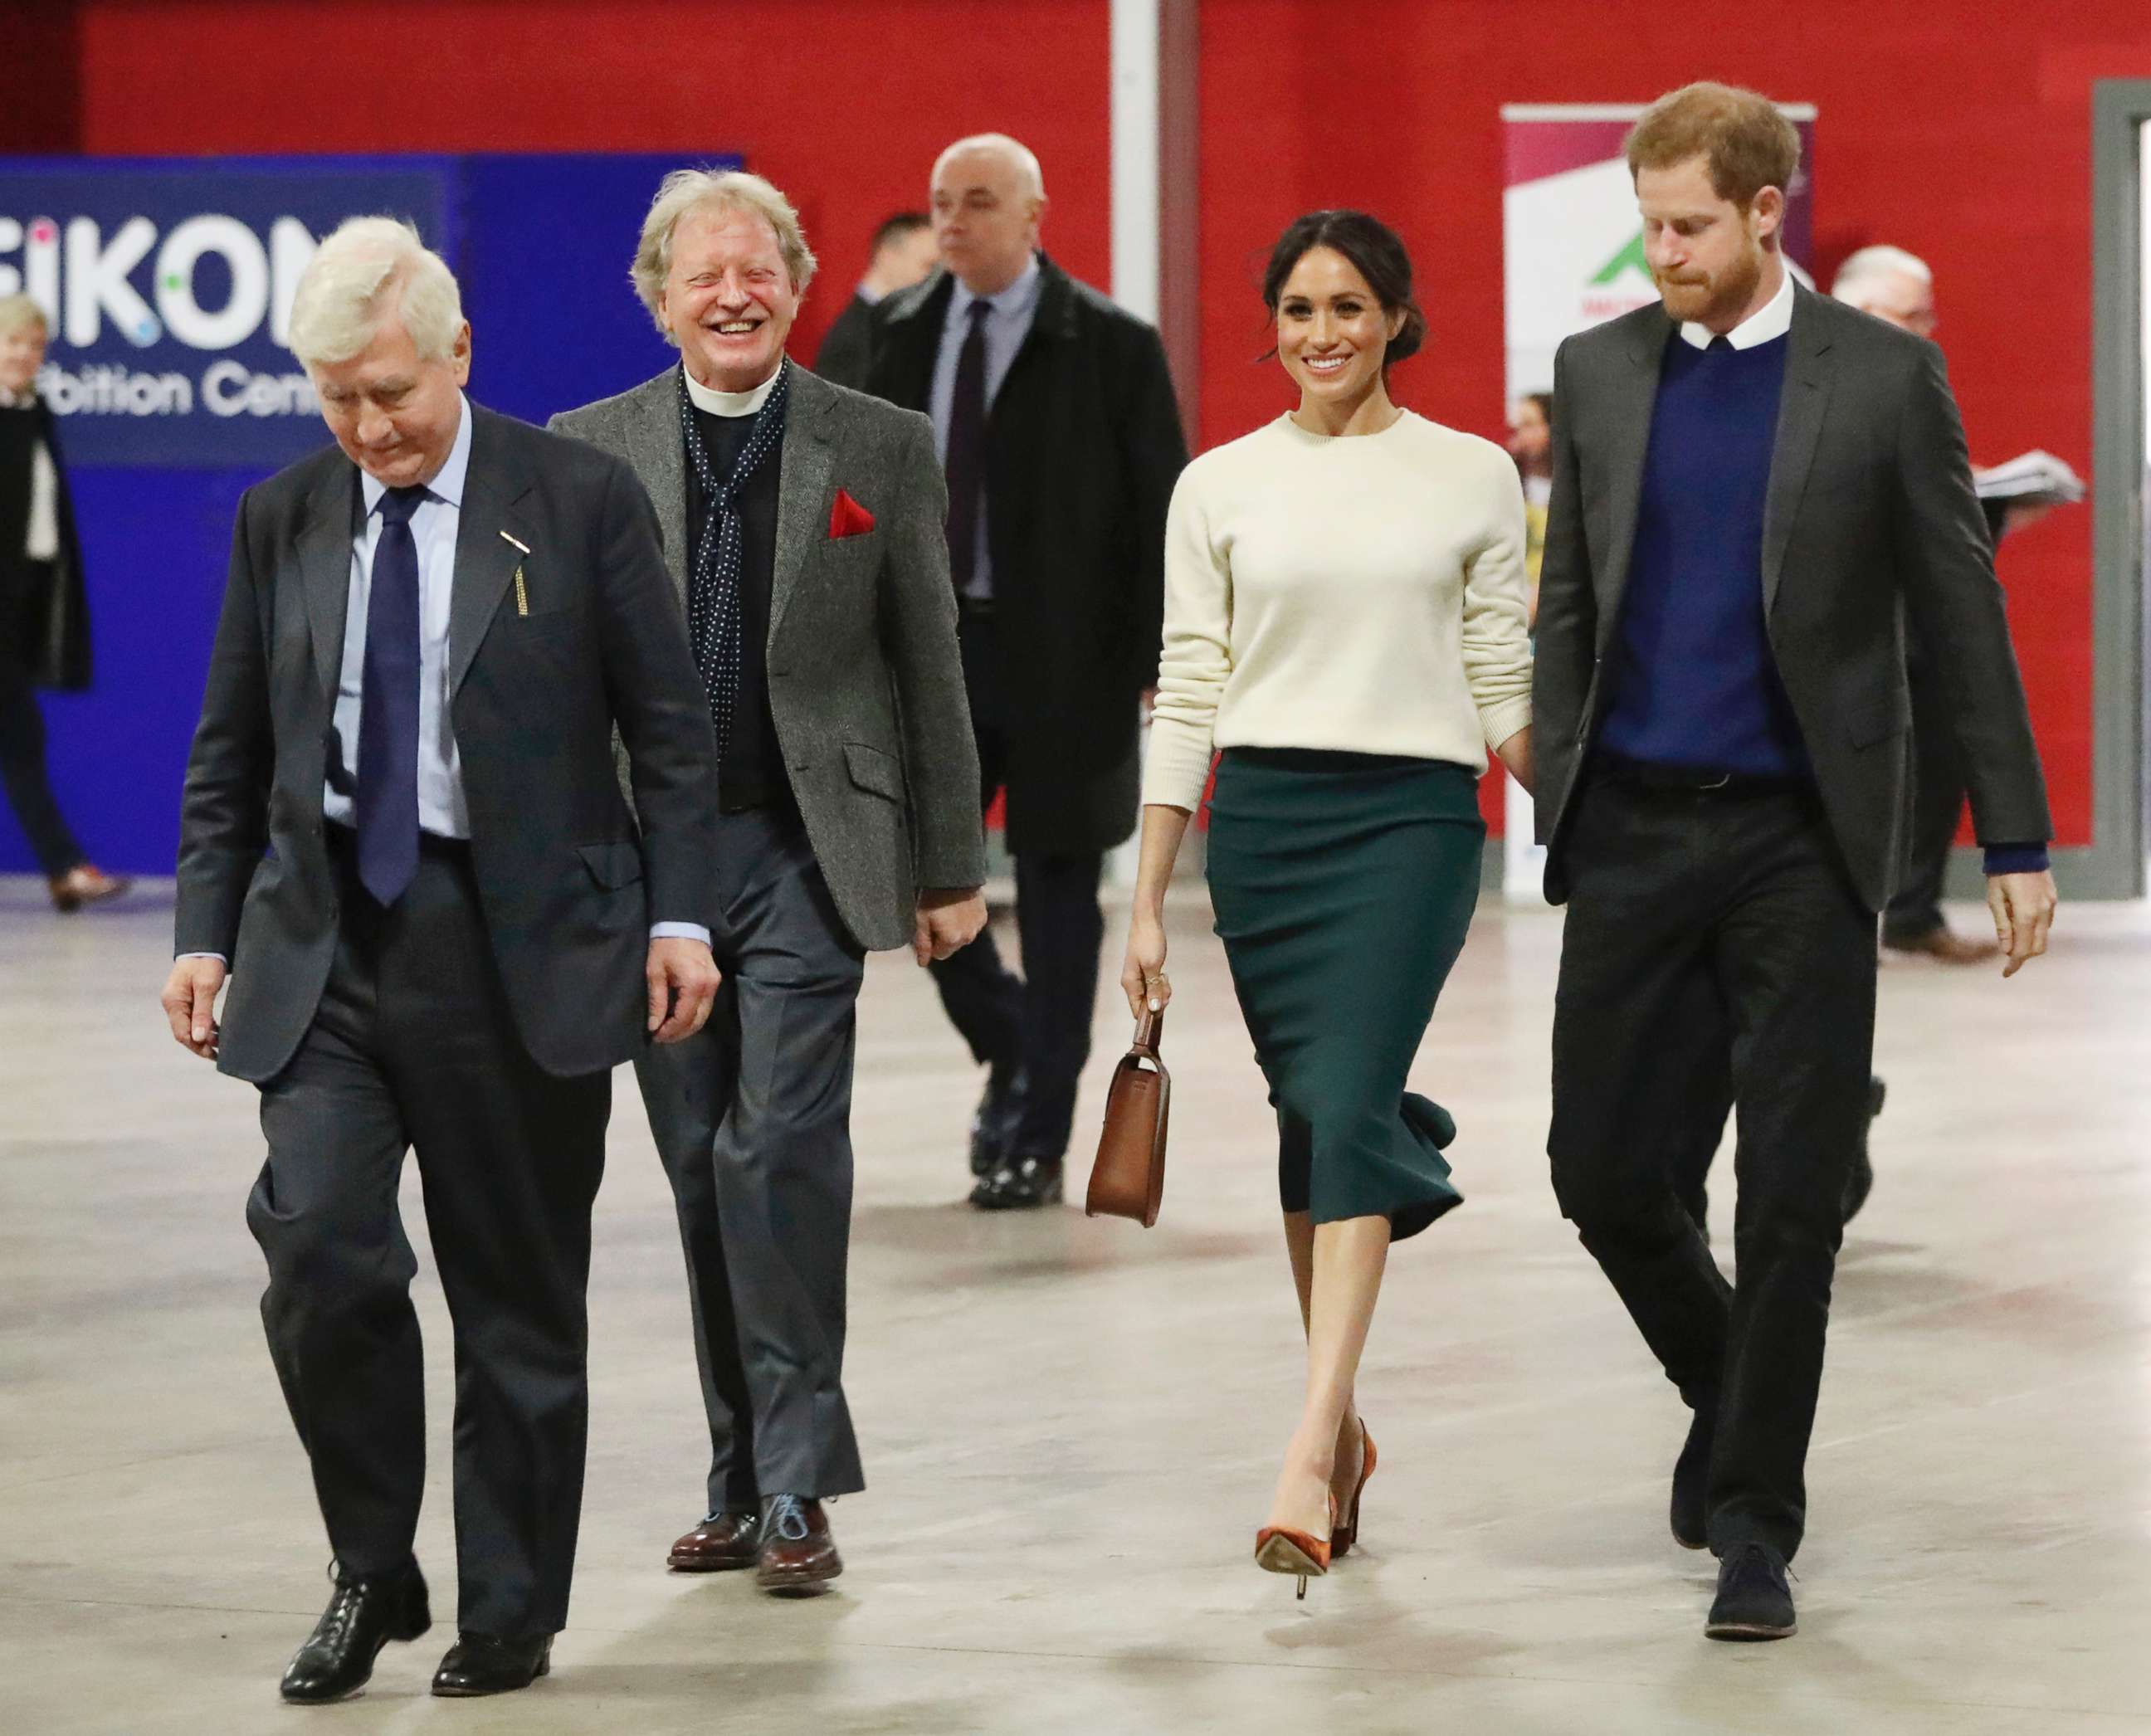 PHOTO: The Reverend Dr. David Latimer, second left, walks with Meghan Markle and Britain's Prince Harry as they arrive for a visit to the Eikon Exhibition Centre in Lisburn, Northern Ireland, March 23, 2018. 